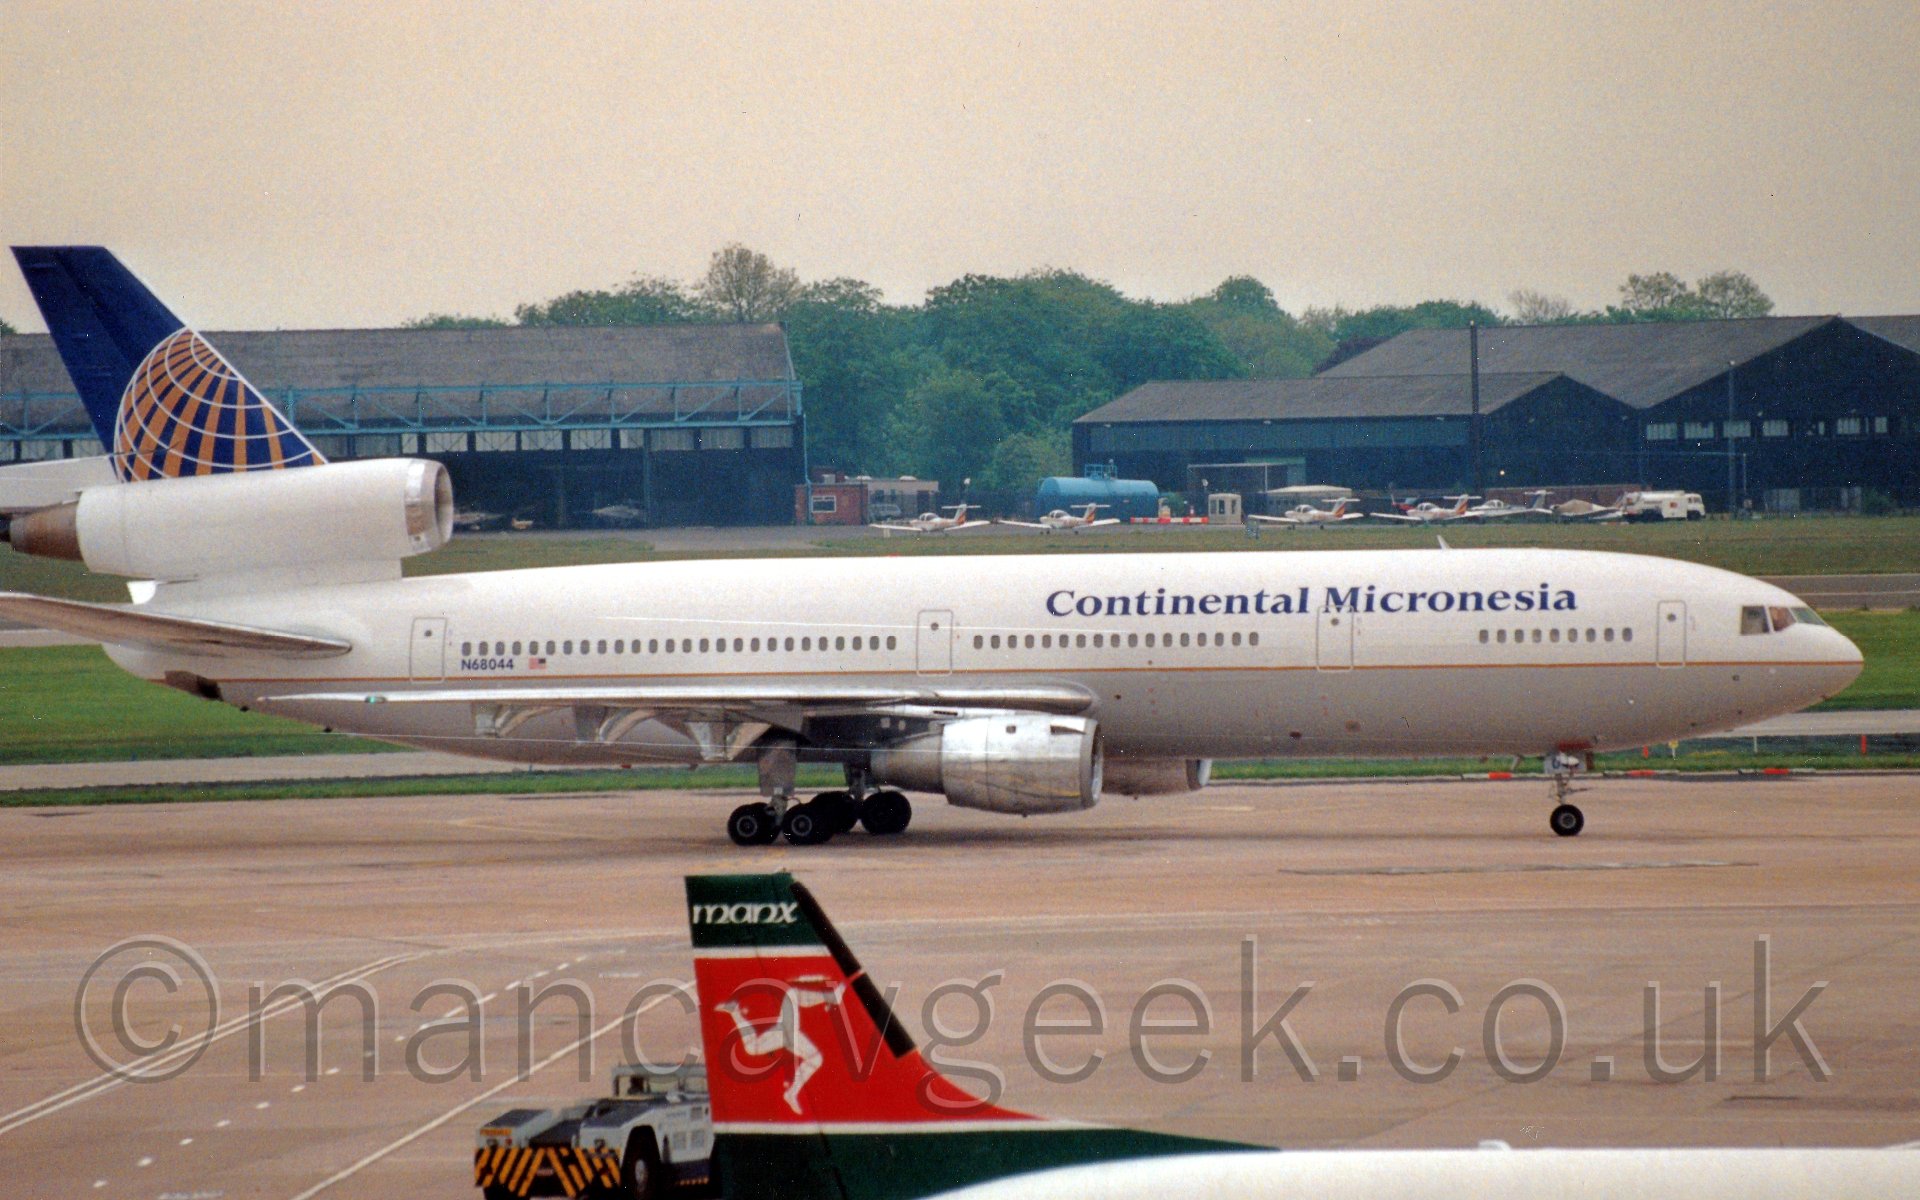 Side view of a three engined jet airliner taxiing from left to right. The plane has a light grey belly and white upper half, seperated by a thin gold stripe. There are dark blue "Continental Micronesia" titles on the upper forward fuselage. The tail has a white lower section, up to the top of the centre engine cowling, then the upper section is a dark blue, overlaid with a stylised wireframe globe in white and gold. In the foreground is the tail of a smaller plane, mostly red, with green stripes at the top and bottom. The red section has 3 legs, arranged like the spokes of a wheel, joined at the hip and looking as if they are running/rolling. In the background are a handful of black hangars, with some light aircraft parked in front of them, with trees behind. under a yellow-tinged grey sky